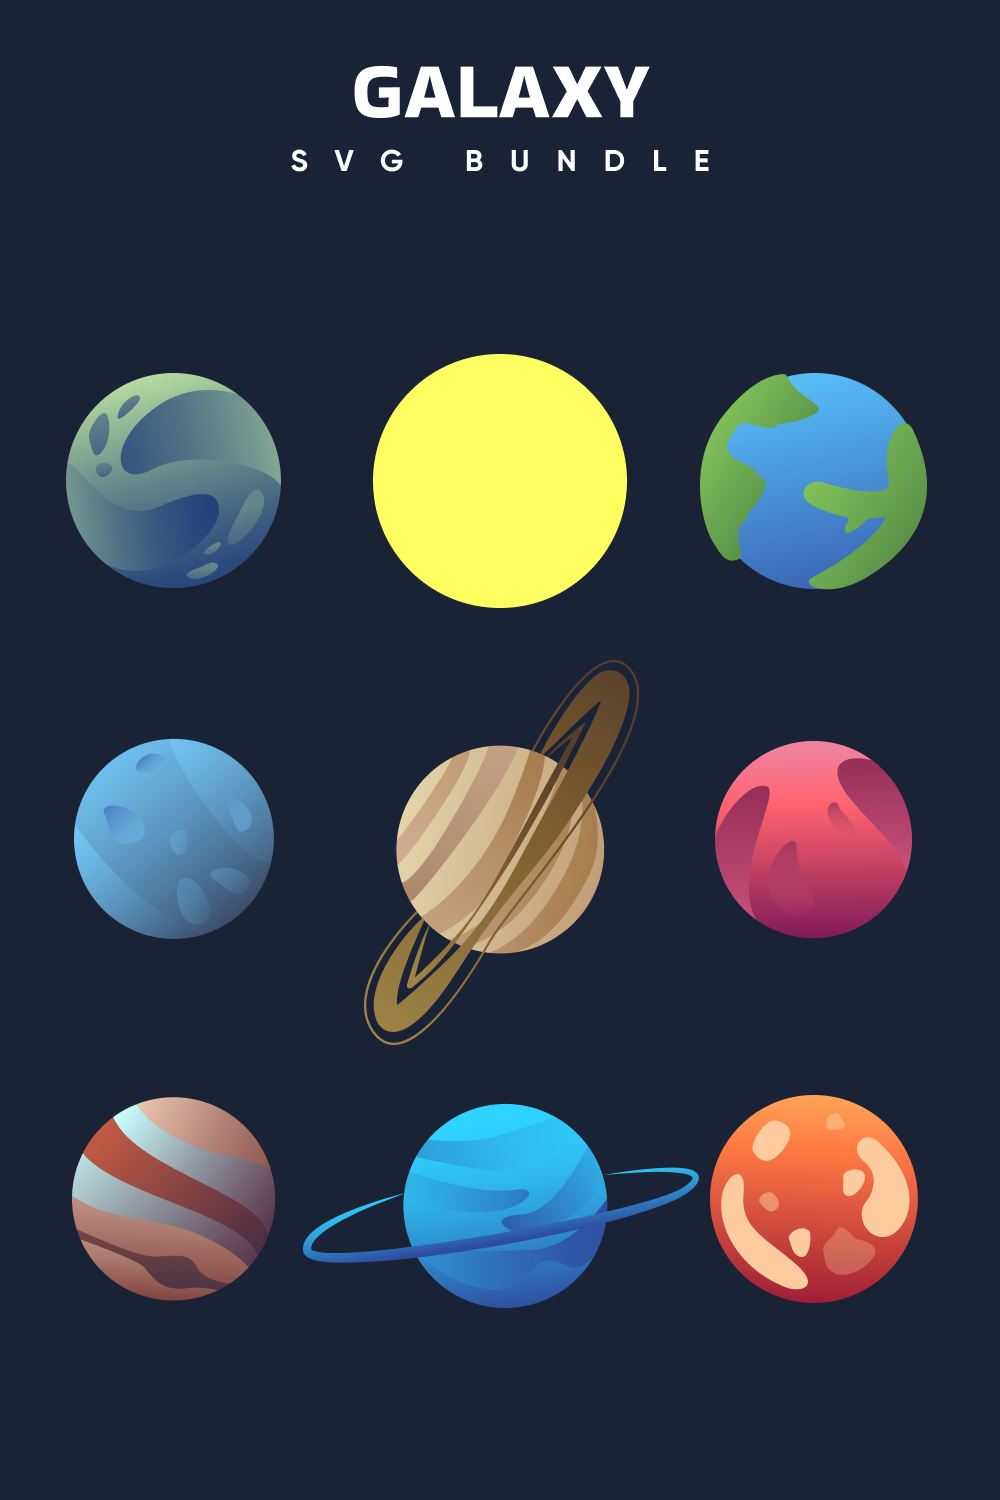 Colorful planets for your galaxy.